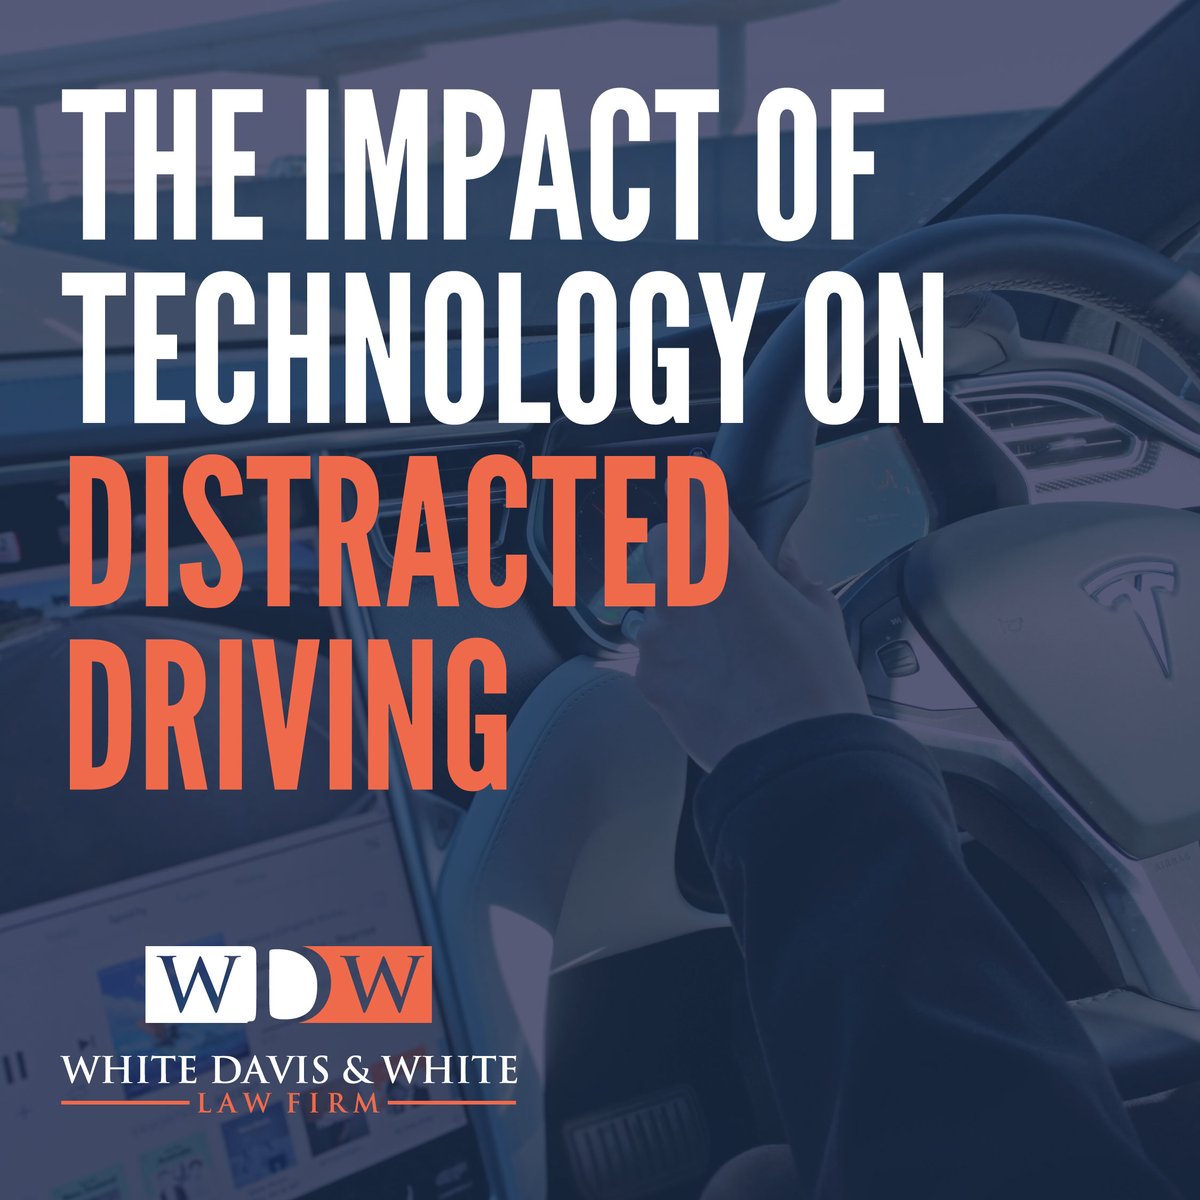 Learn the effects of technology on distracted driving in our latest blog post! 🚗💻 

LINK IN BIO!

864.231.8090 | WDWLawFirm.com

#WDWLawFirm #WhiteDavisandWhite #law #lawyer #legal #lawyers #attorney #lawfirm #lawyerlife #justice #personalinjury #accidentlawyer #Blog